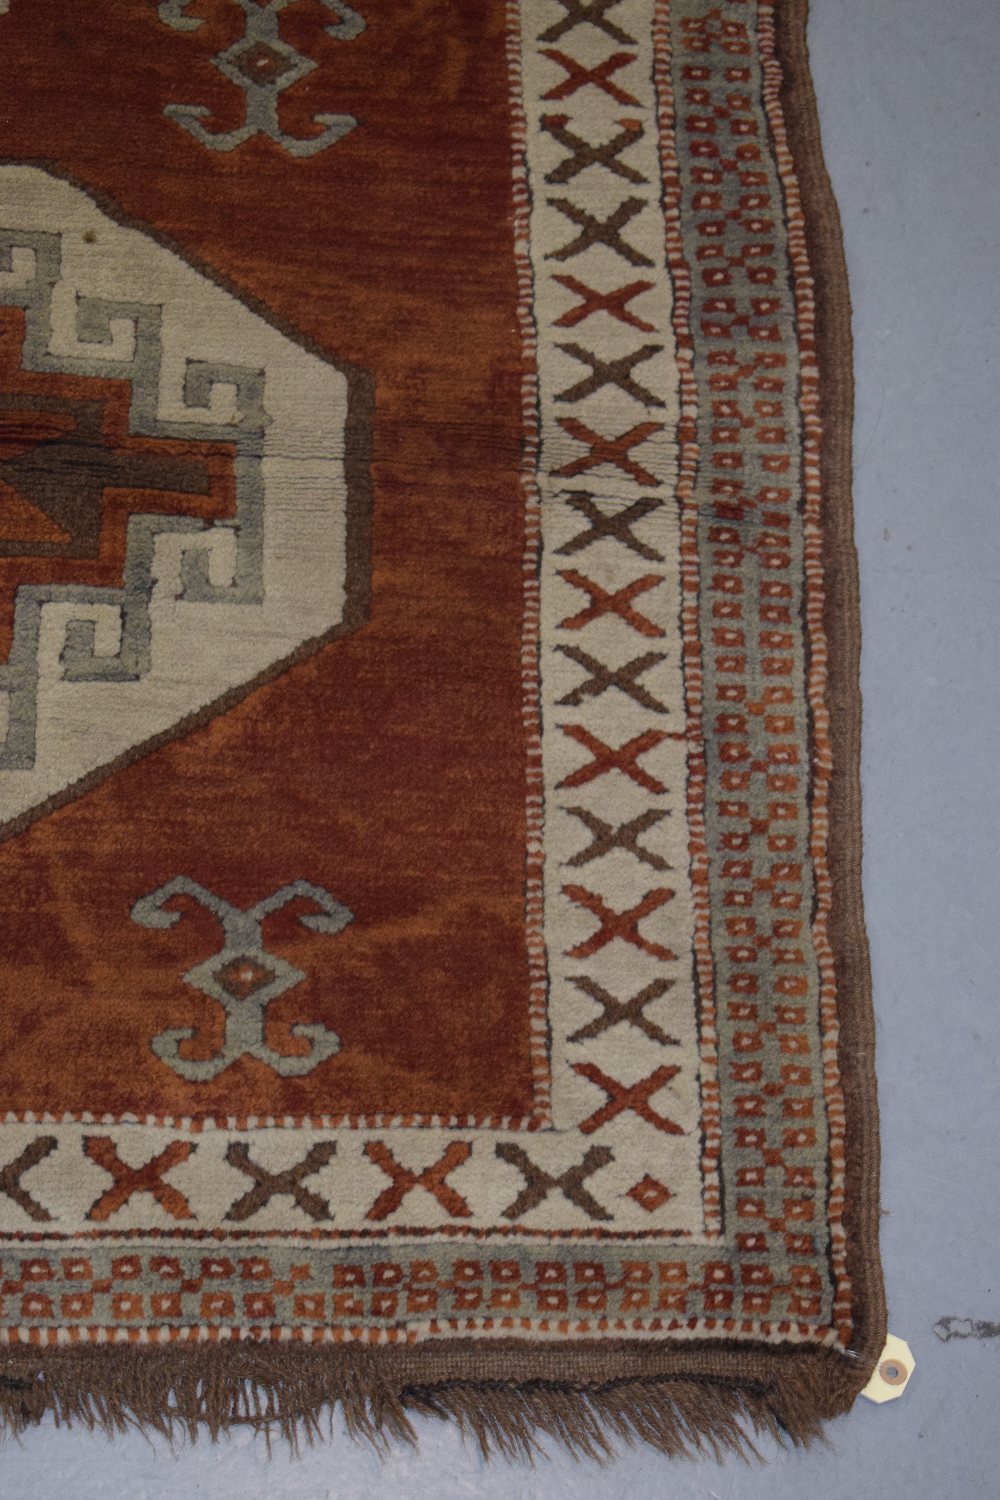 Two Anatolian rugs, the first: Konya kelim, central Anatolia, circa 1940s-50s, 4ft. 11in. X 3ft. - Image 11 of 17